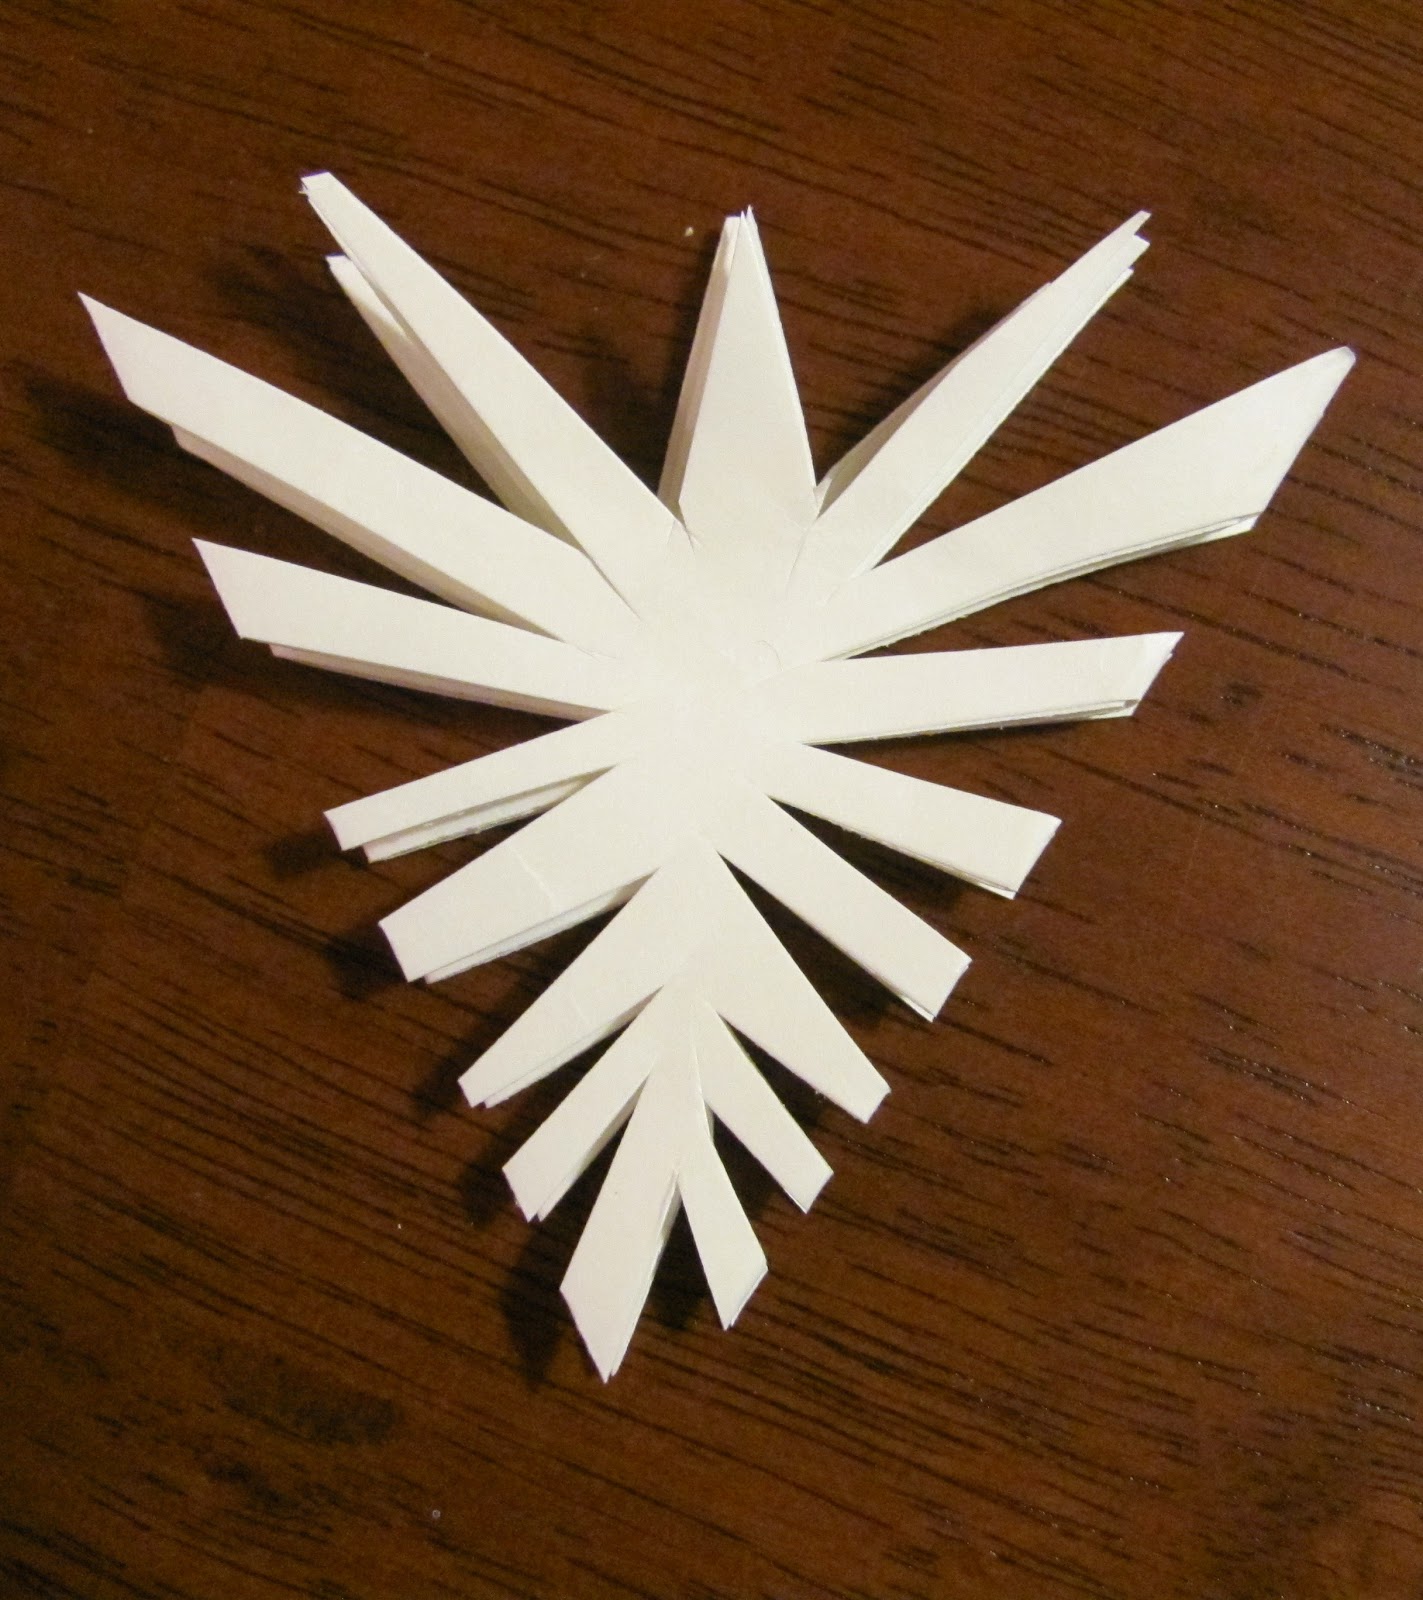 There's a Dragon in my Art Room: A proper snowflake!